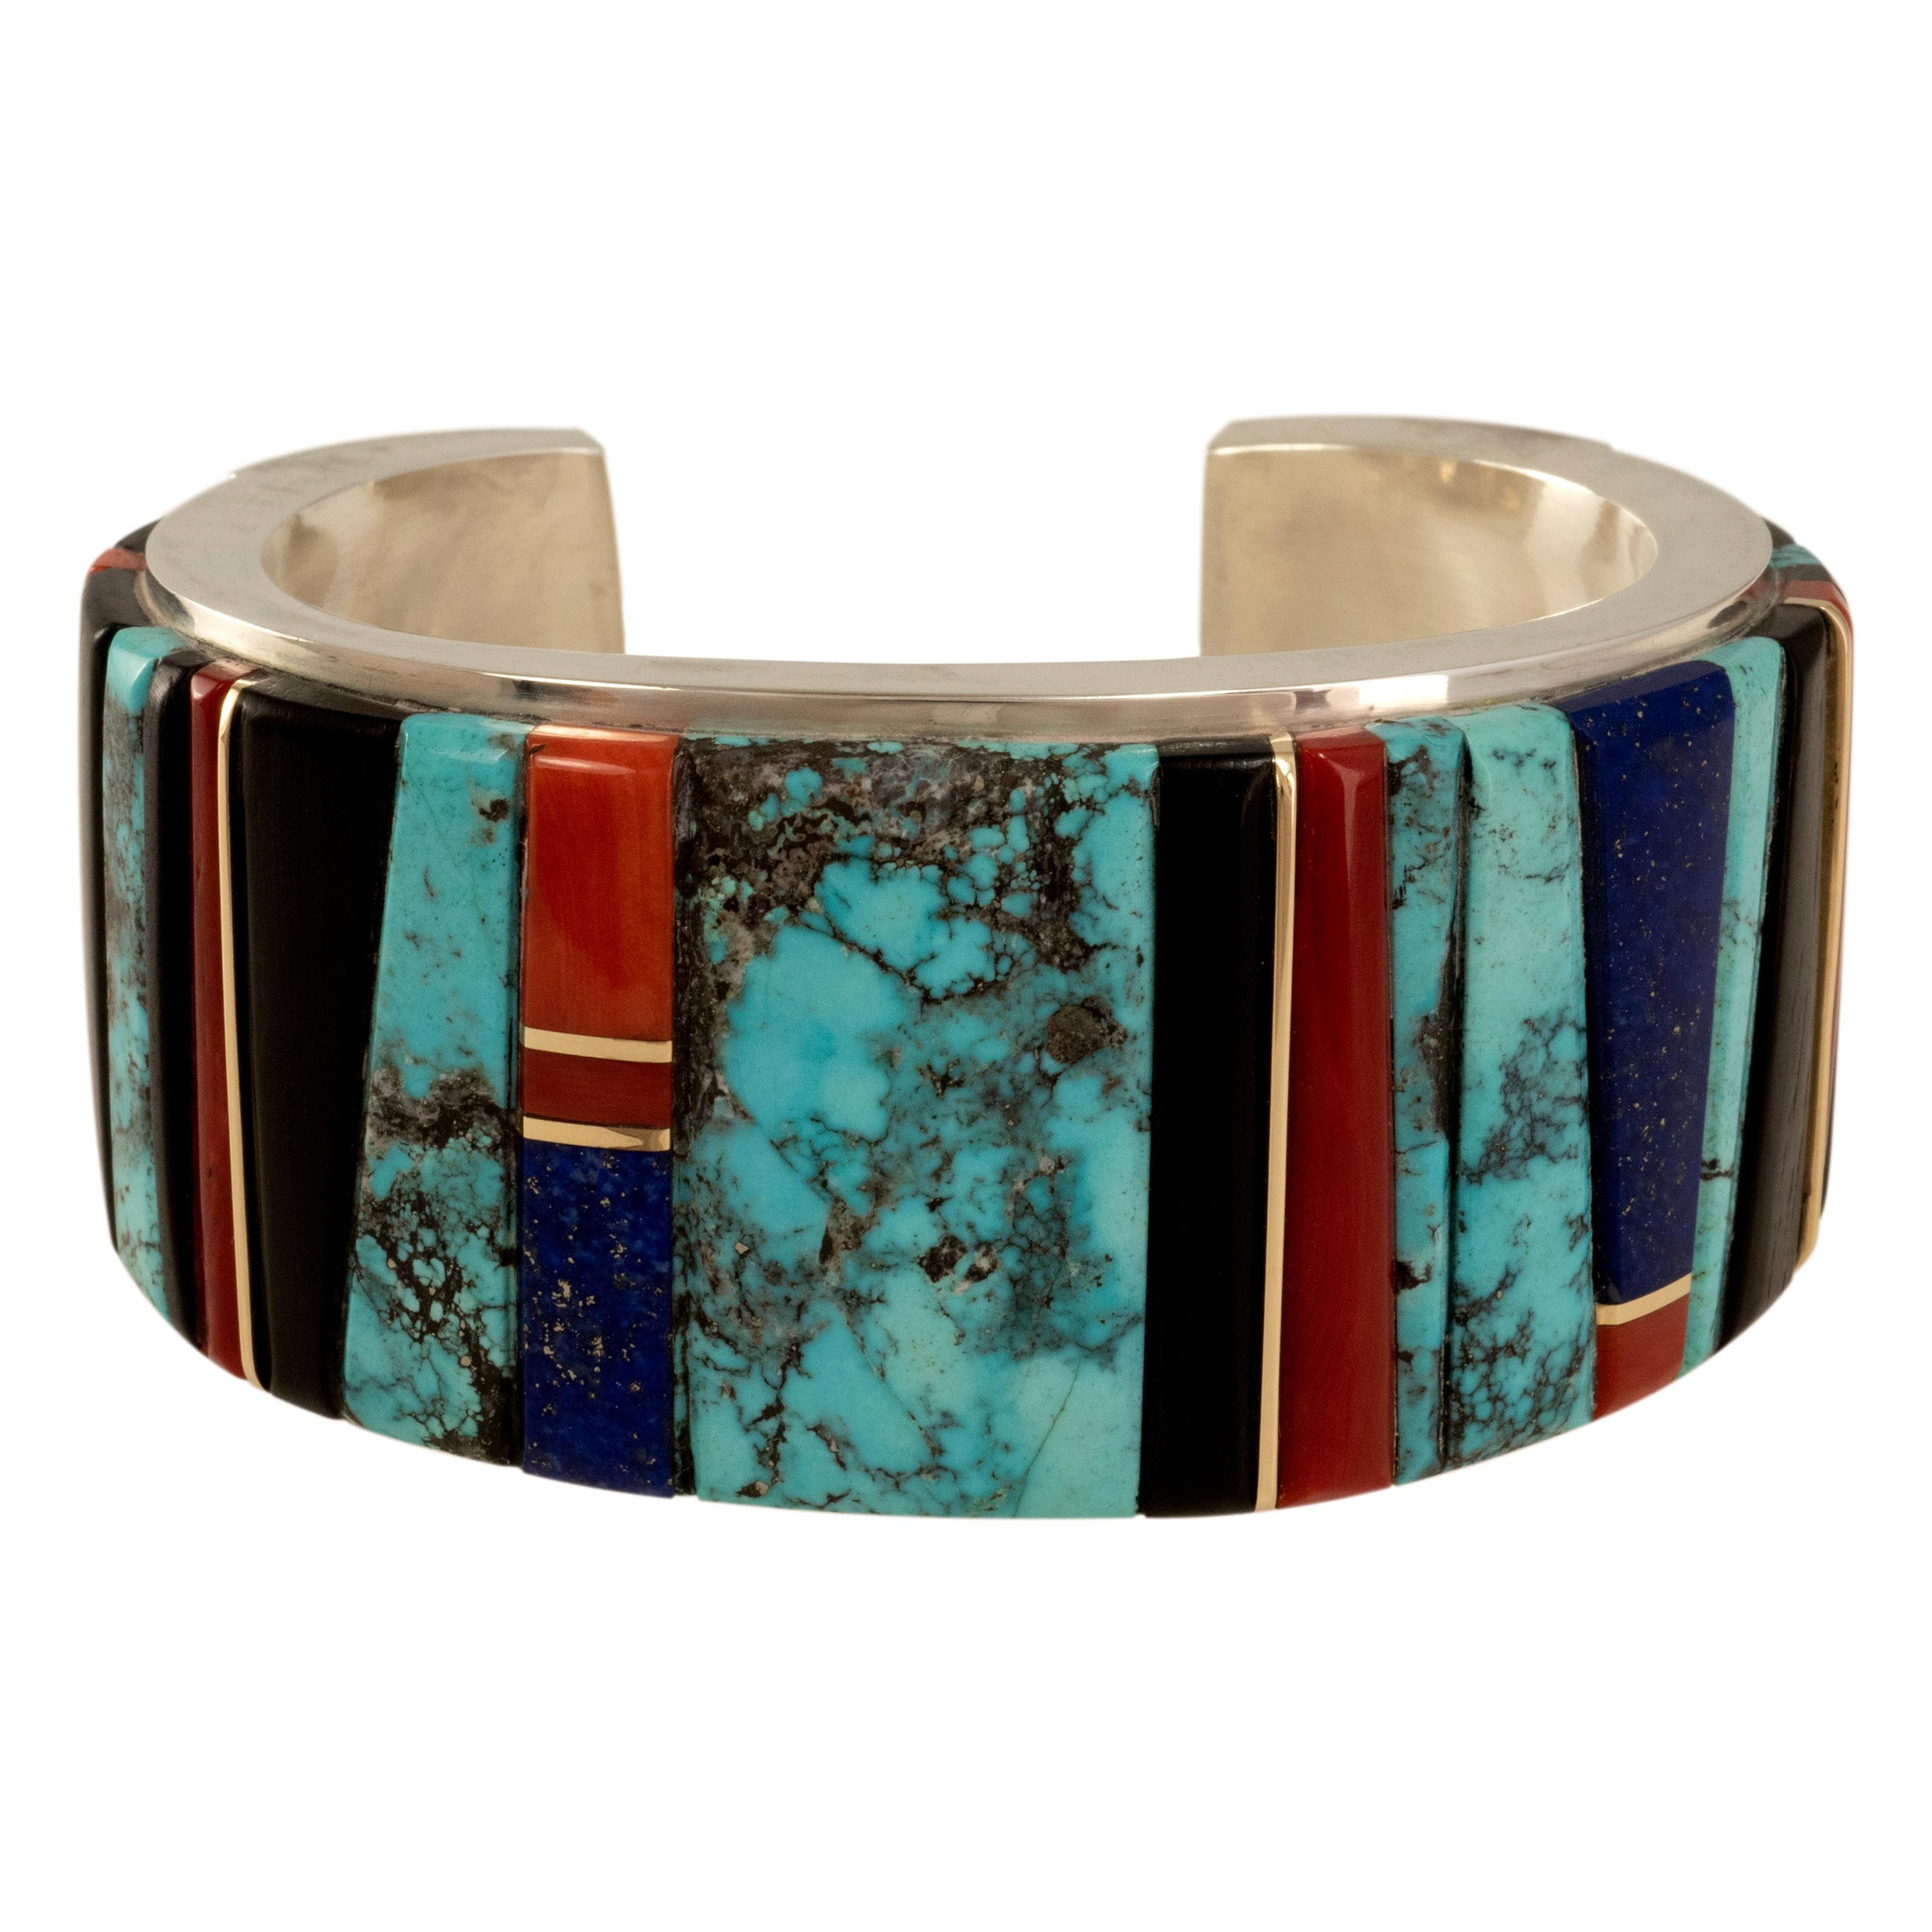 Edison Cummings Bisbee Turquoise, Lapis, Coral, Wood, Gold & Silver Cuff